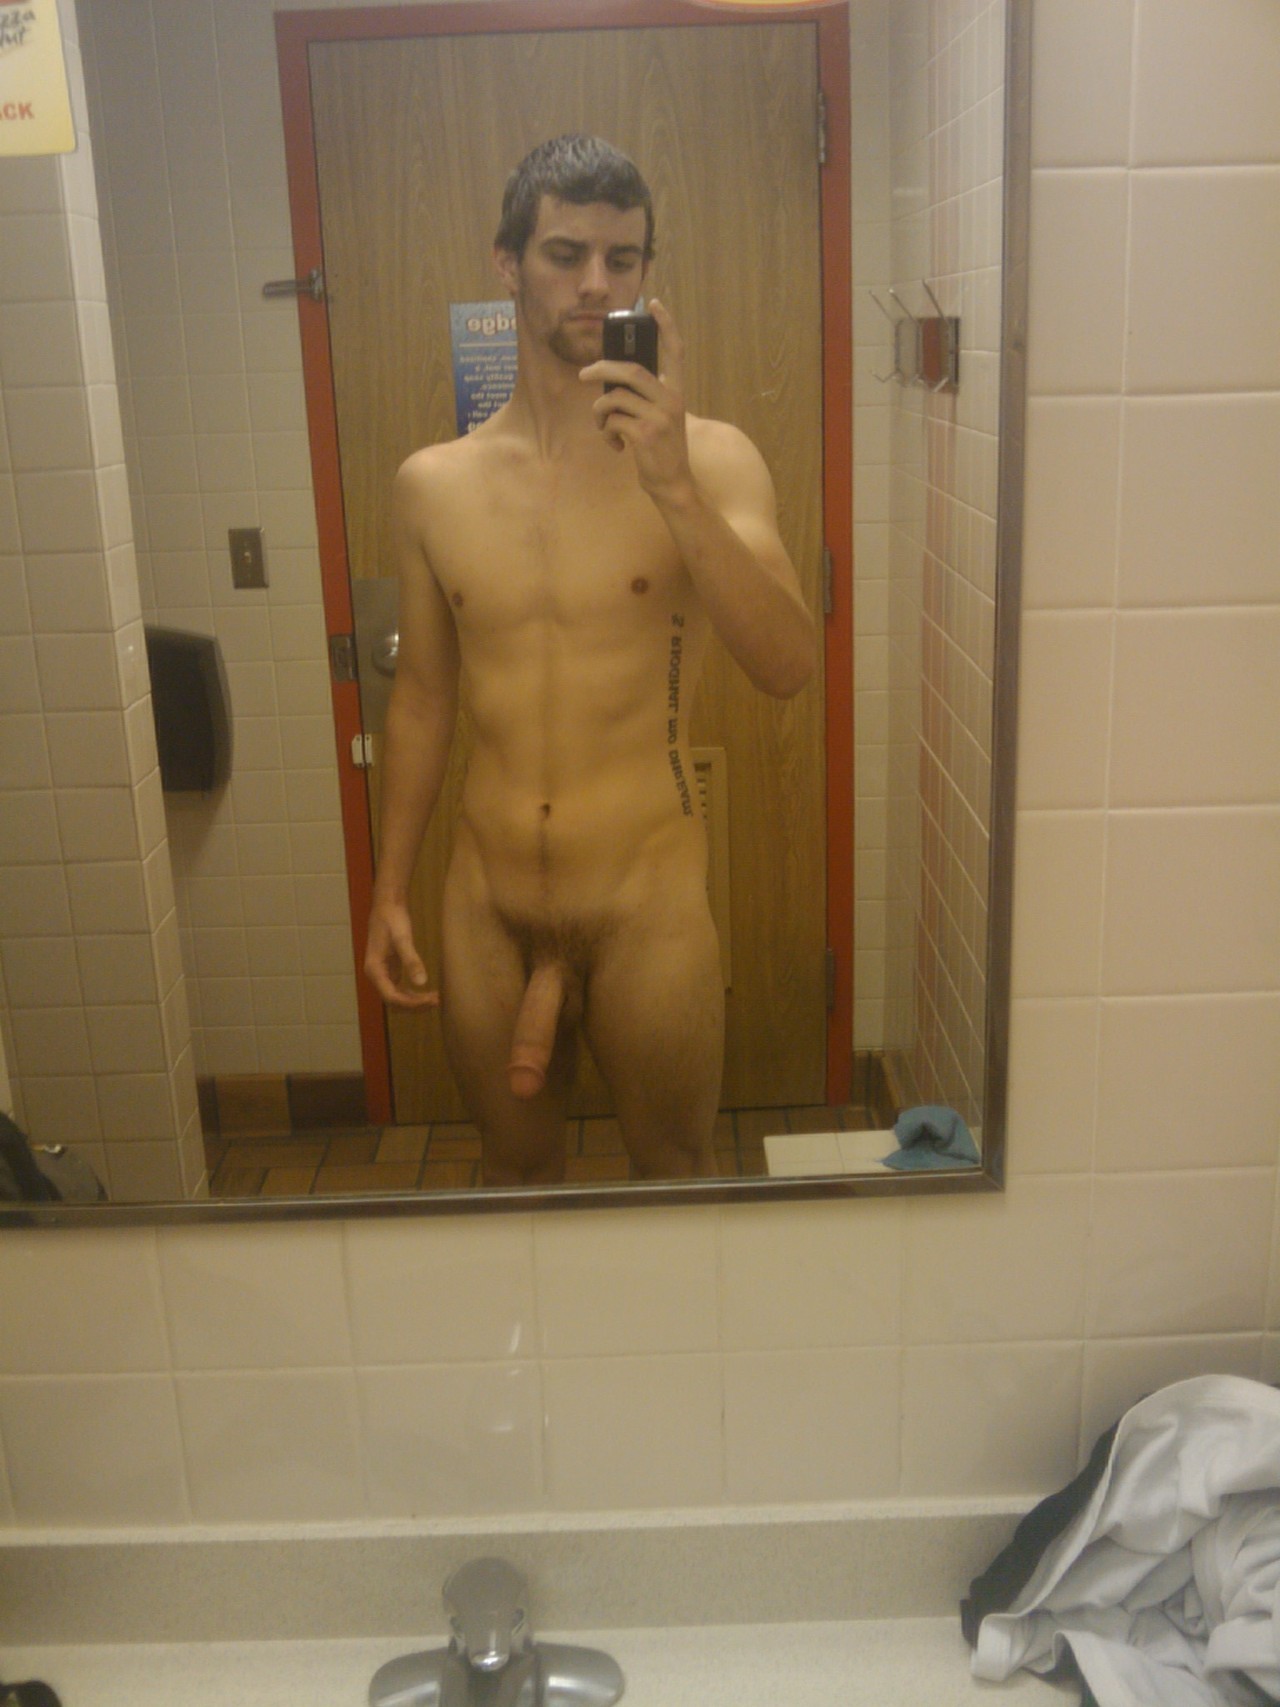 nakedstraightguys:  Awesome nude pic of some hung guy in a public bathroom. Nice